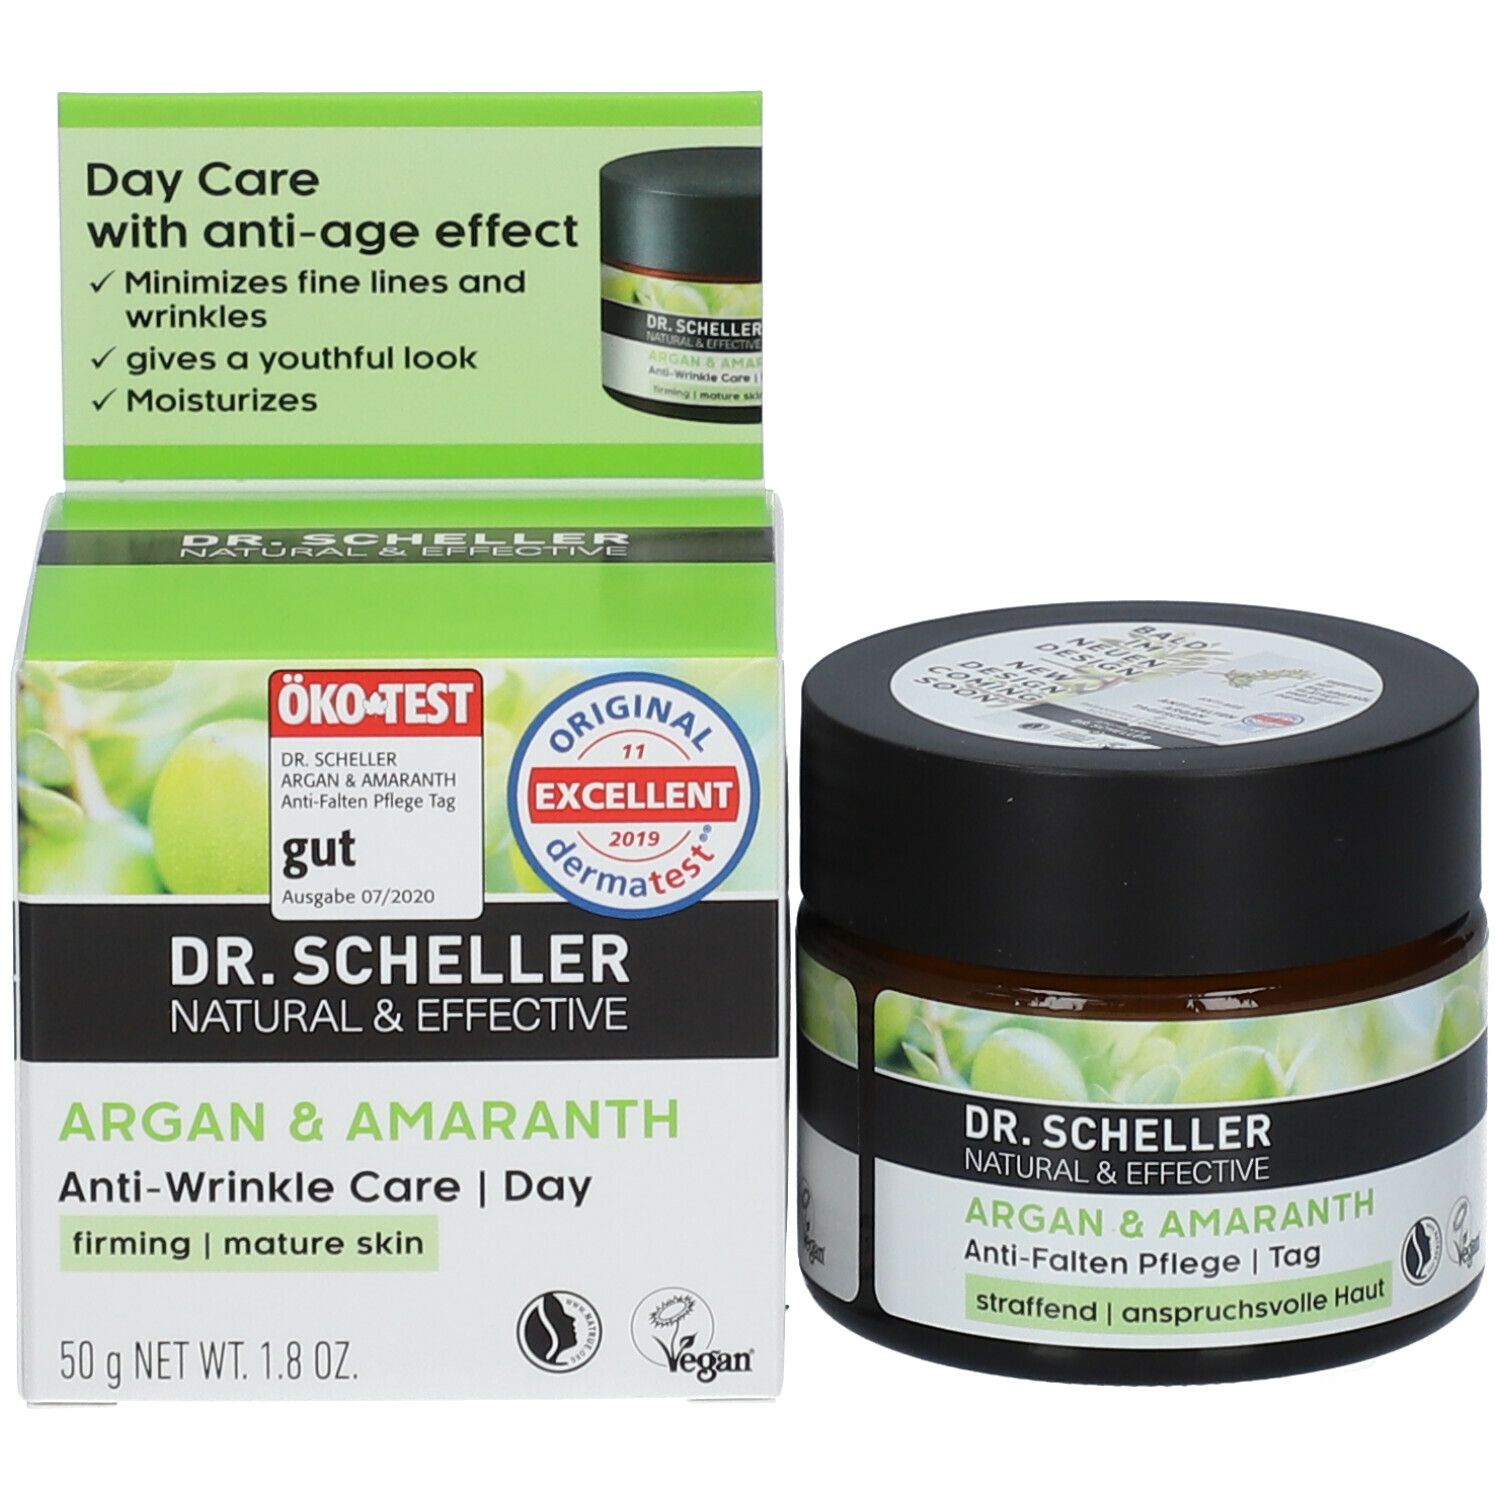 Dr. Scheller Argan Oil and Amaranth Anti-Wrinkle Day Care, 1.8 Ounce